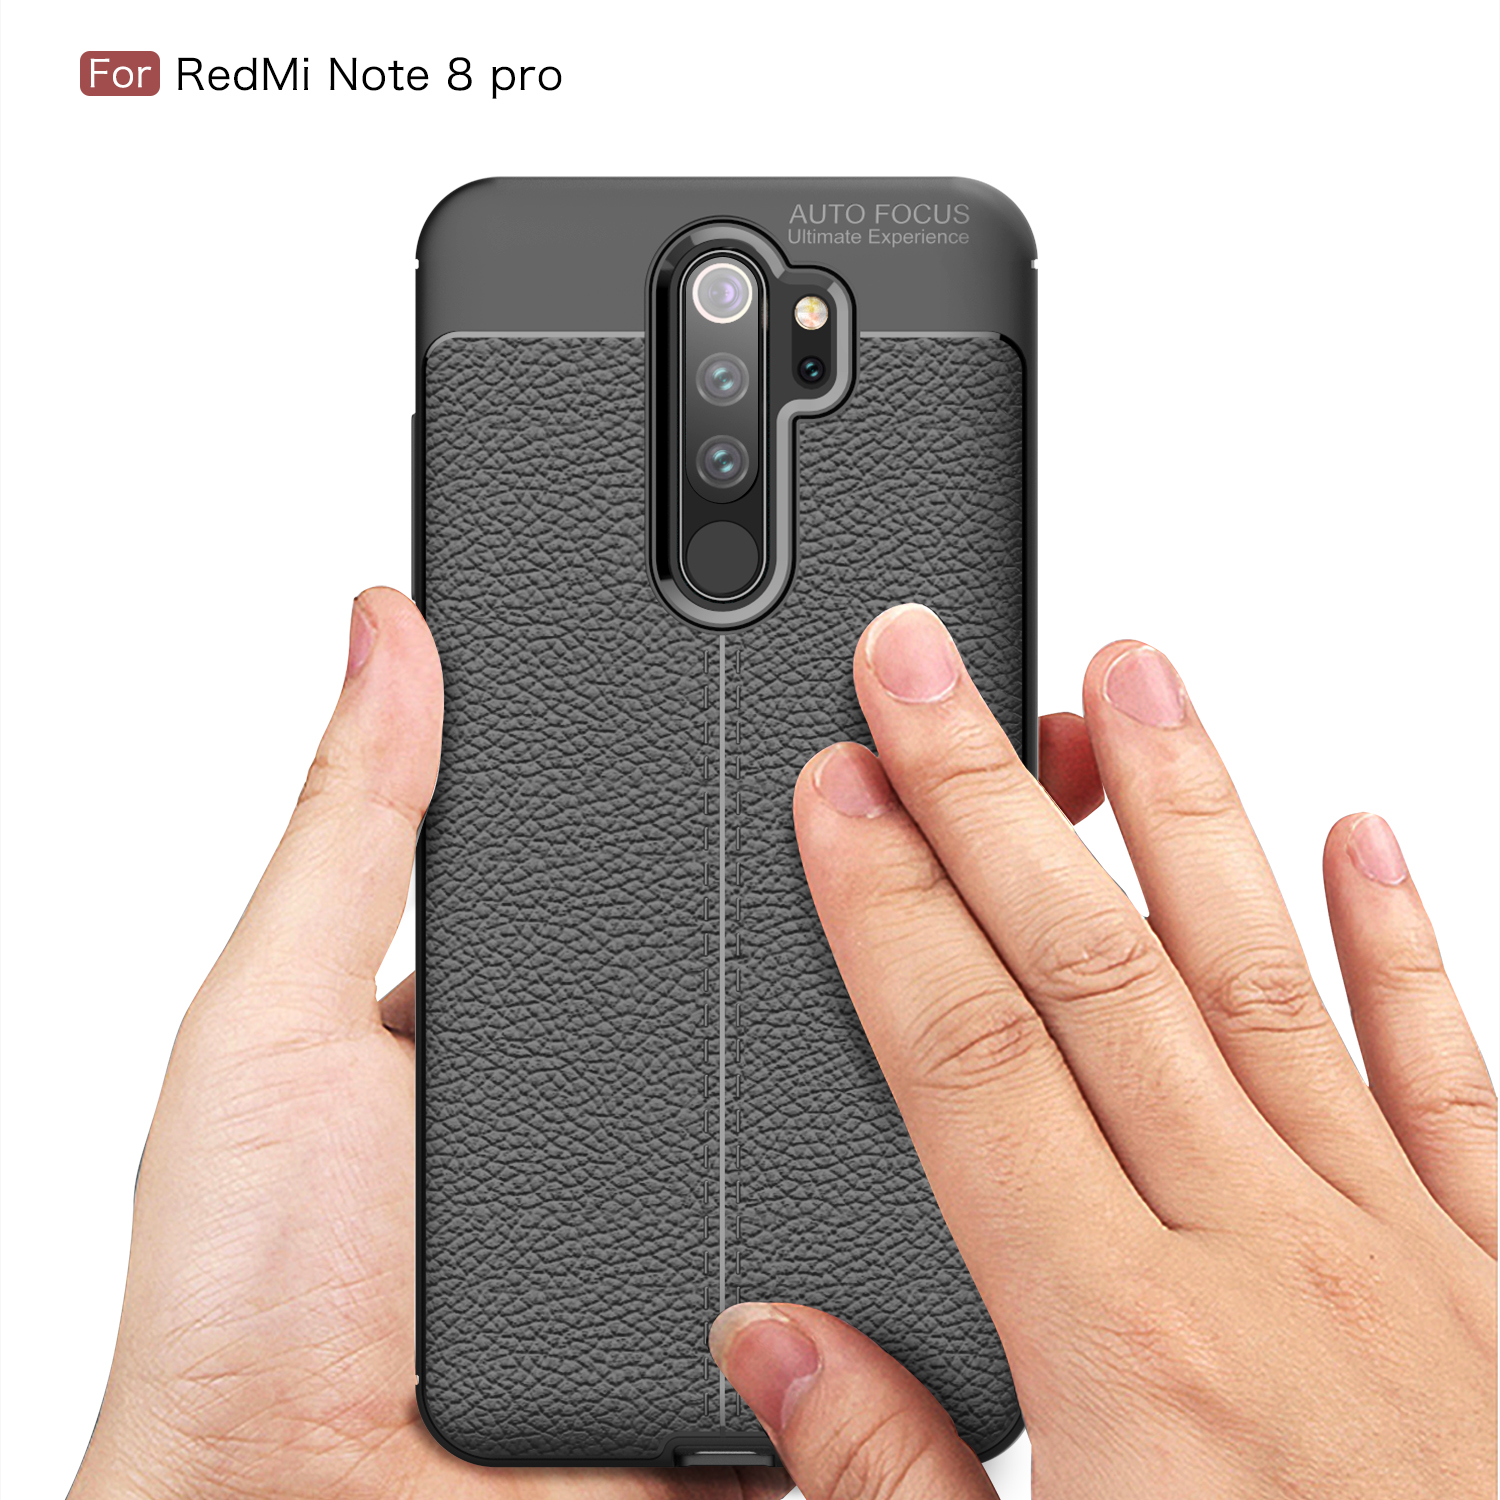 Bakeey-Xiaomi-Redmi-Note-8-Pro-Luxury-Litchi-Pattern-Shockproof-PU-Leather-Protective-Case-1588375-11